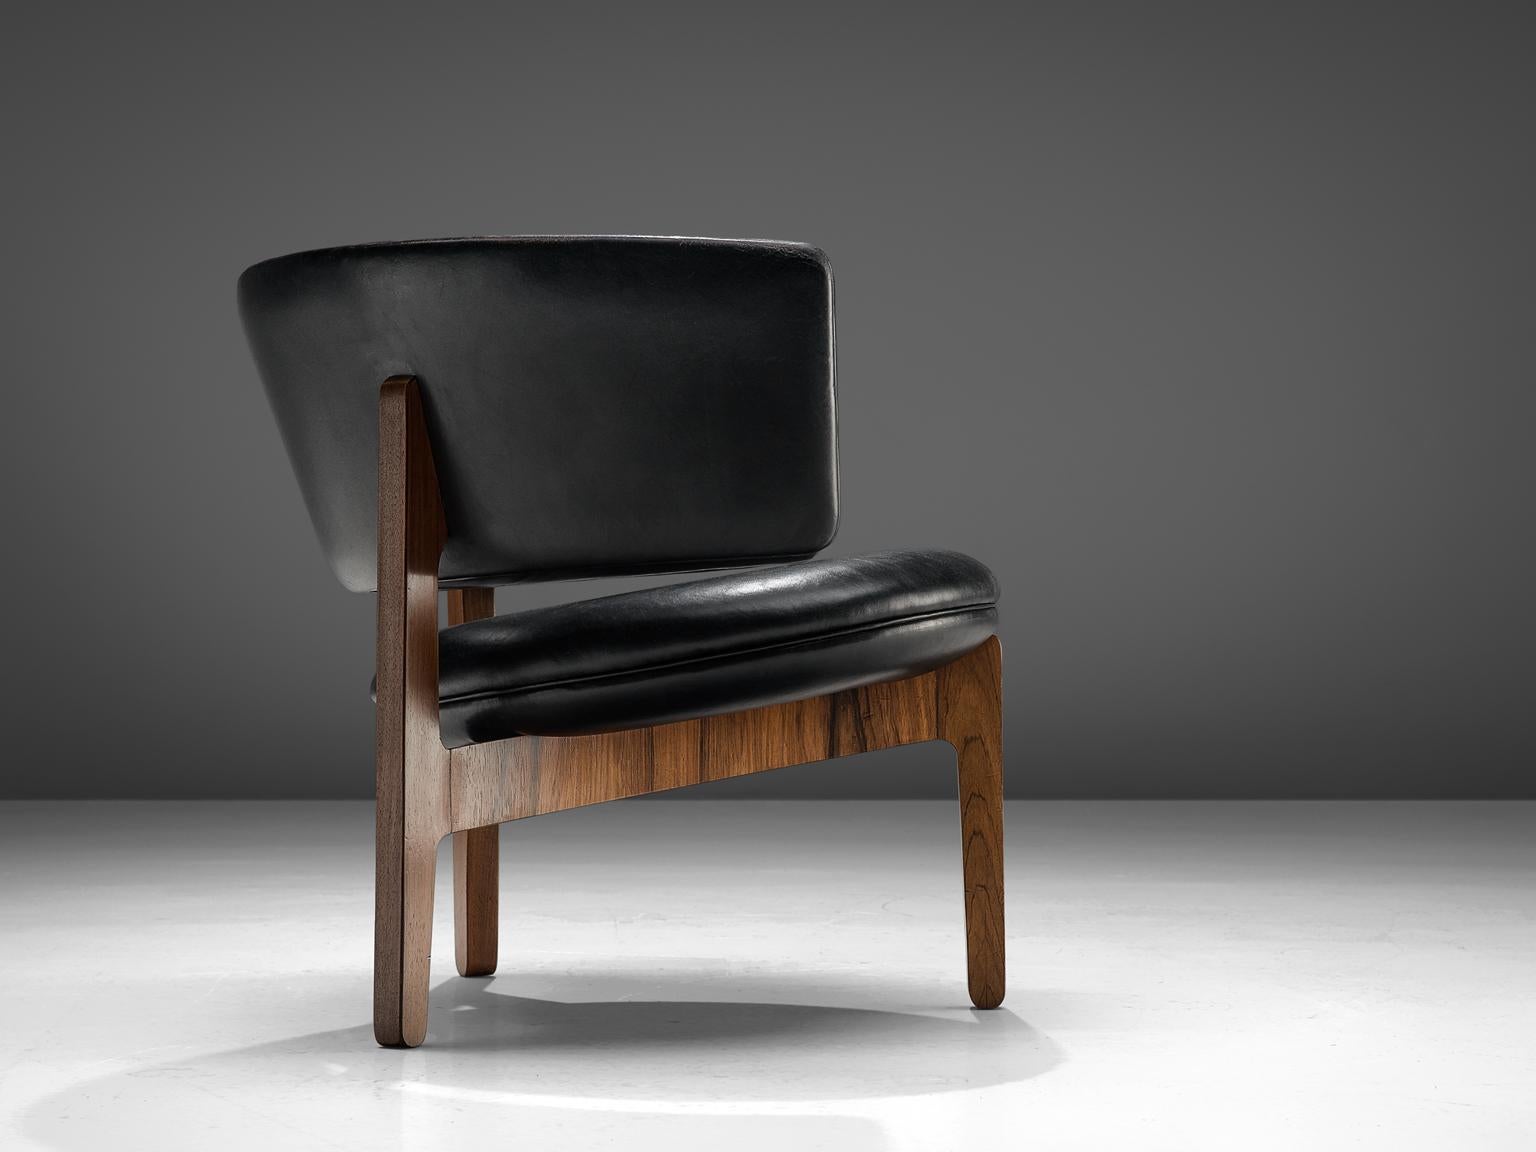 Sven Ellekaer for Christian Linnenberg's Møbelfabrik, lounge chair in rosewood and black leather, Denmark, design 1962.

This piece, featuring a semi-circular back was designed in 1962 together with a small range of accompanying furniture. The